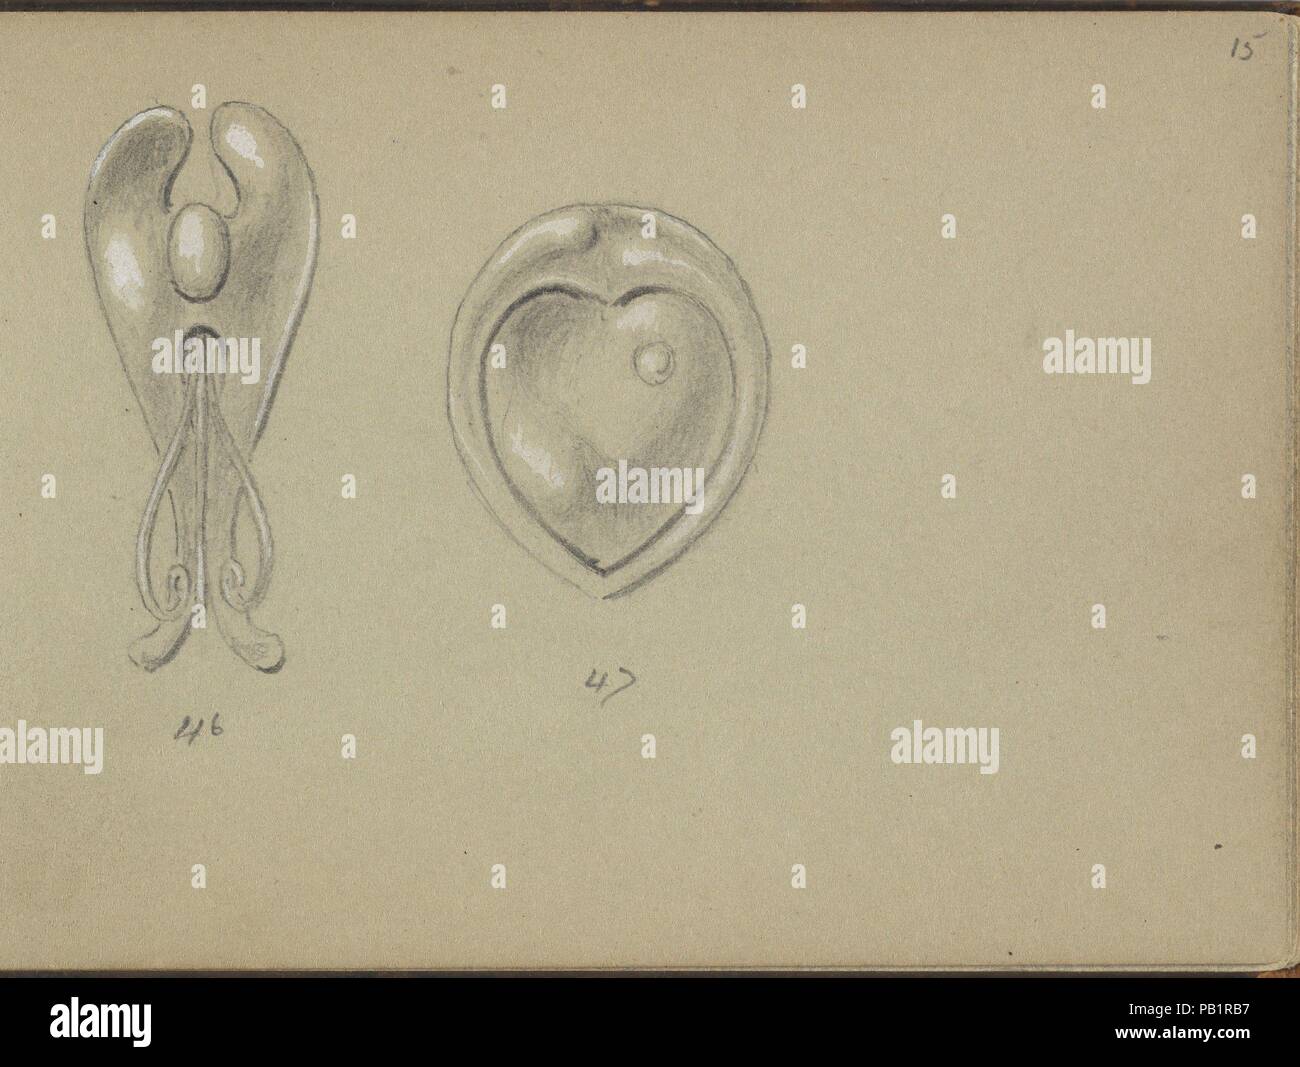 Two Silver Jewelry Designs. Artist: Edgar Gilstrap Simpson (British, 1867-1945 (presumed)). Dimensions: sheet: 3 1/2 x 5 in. (8.9 x 12.7 cm). Date: 1899.  Two designs for silver jewelry pieces, possibly brooches or the tips of stickpins. The design on the left is shaped like a long leaf with a split tip. The second design is characterized by a heart-shaped compartment. Both designs are numbered (numbering continued from the previous pages). Museum: Metropolitan Museum of Art, New York, USA. Stock Photo